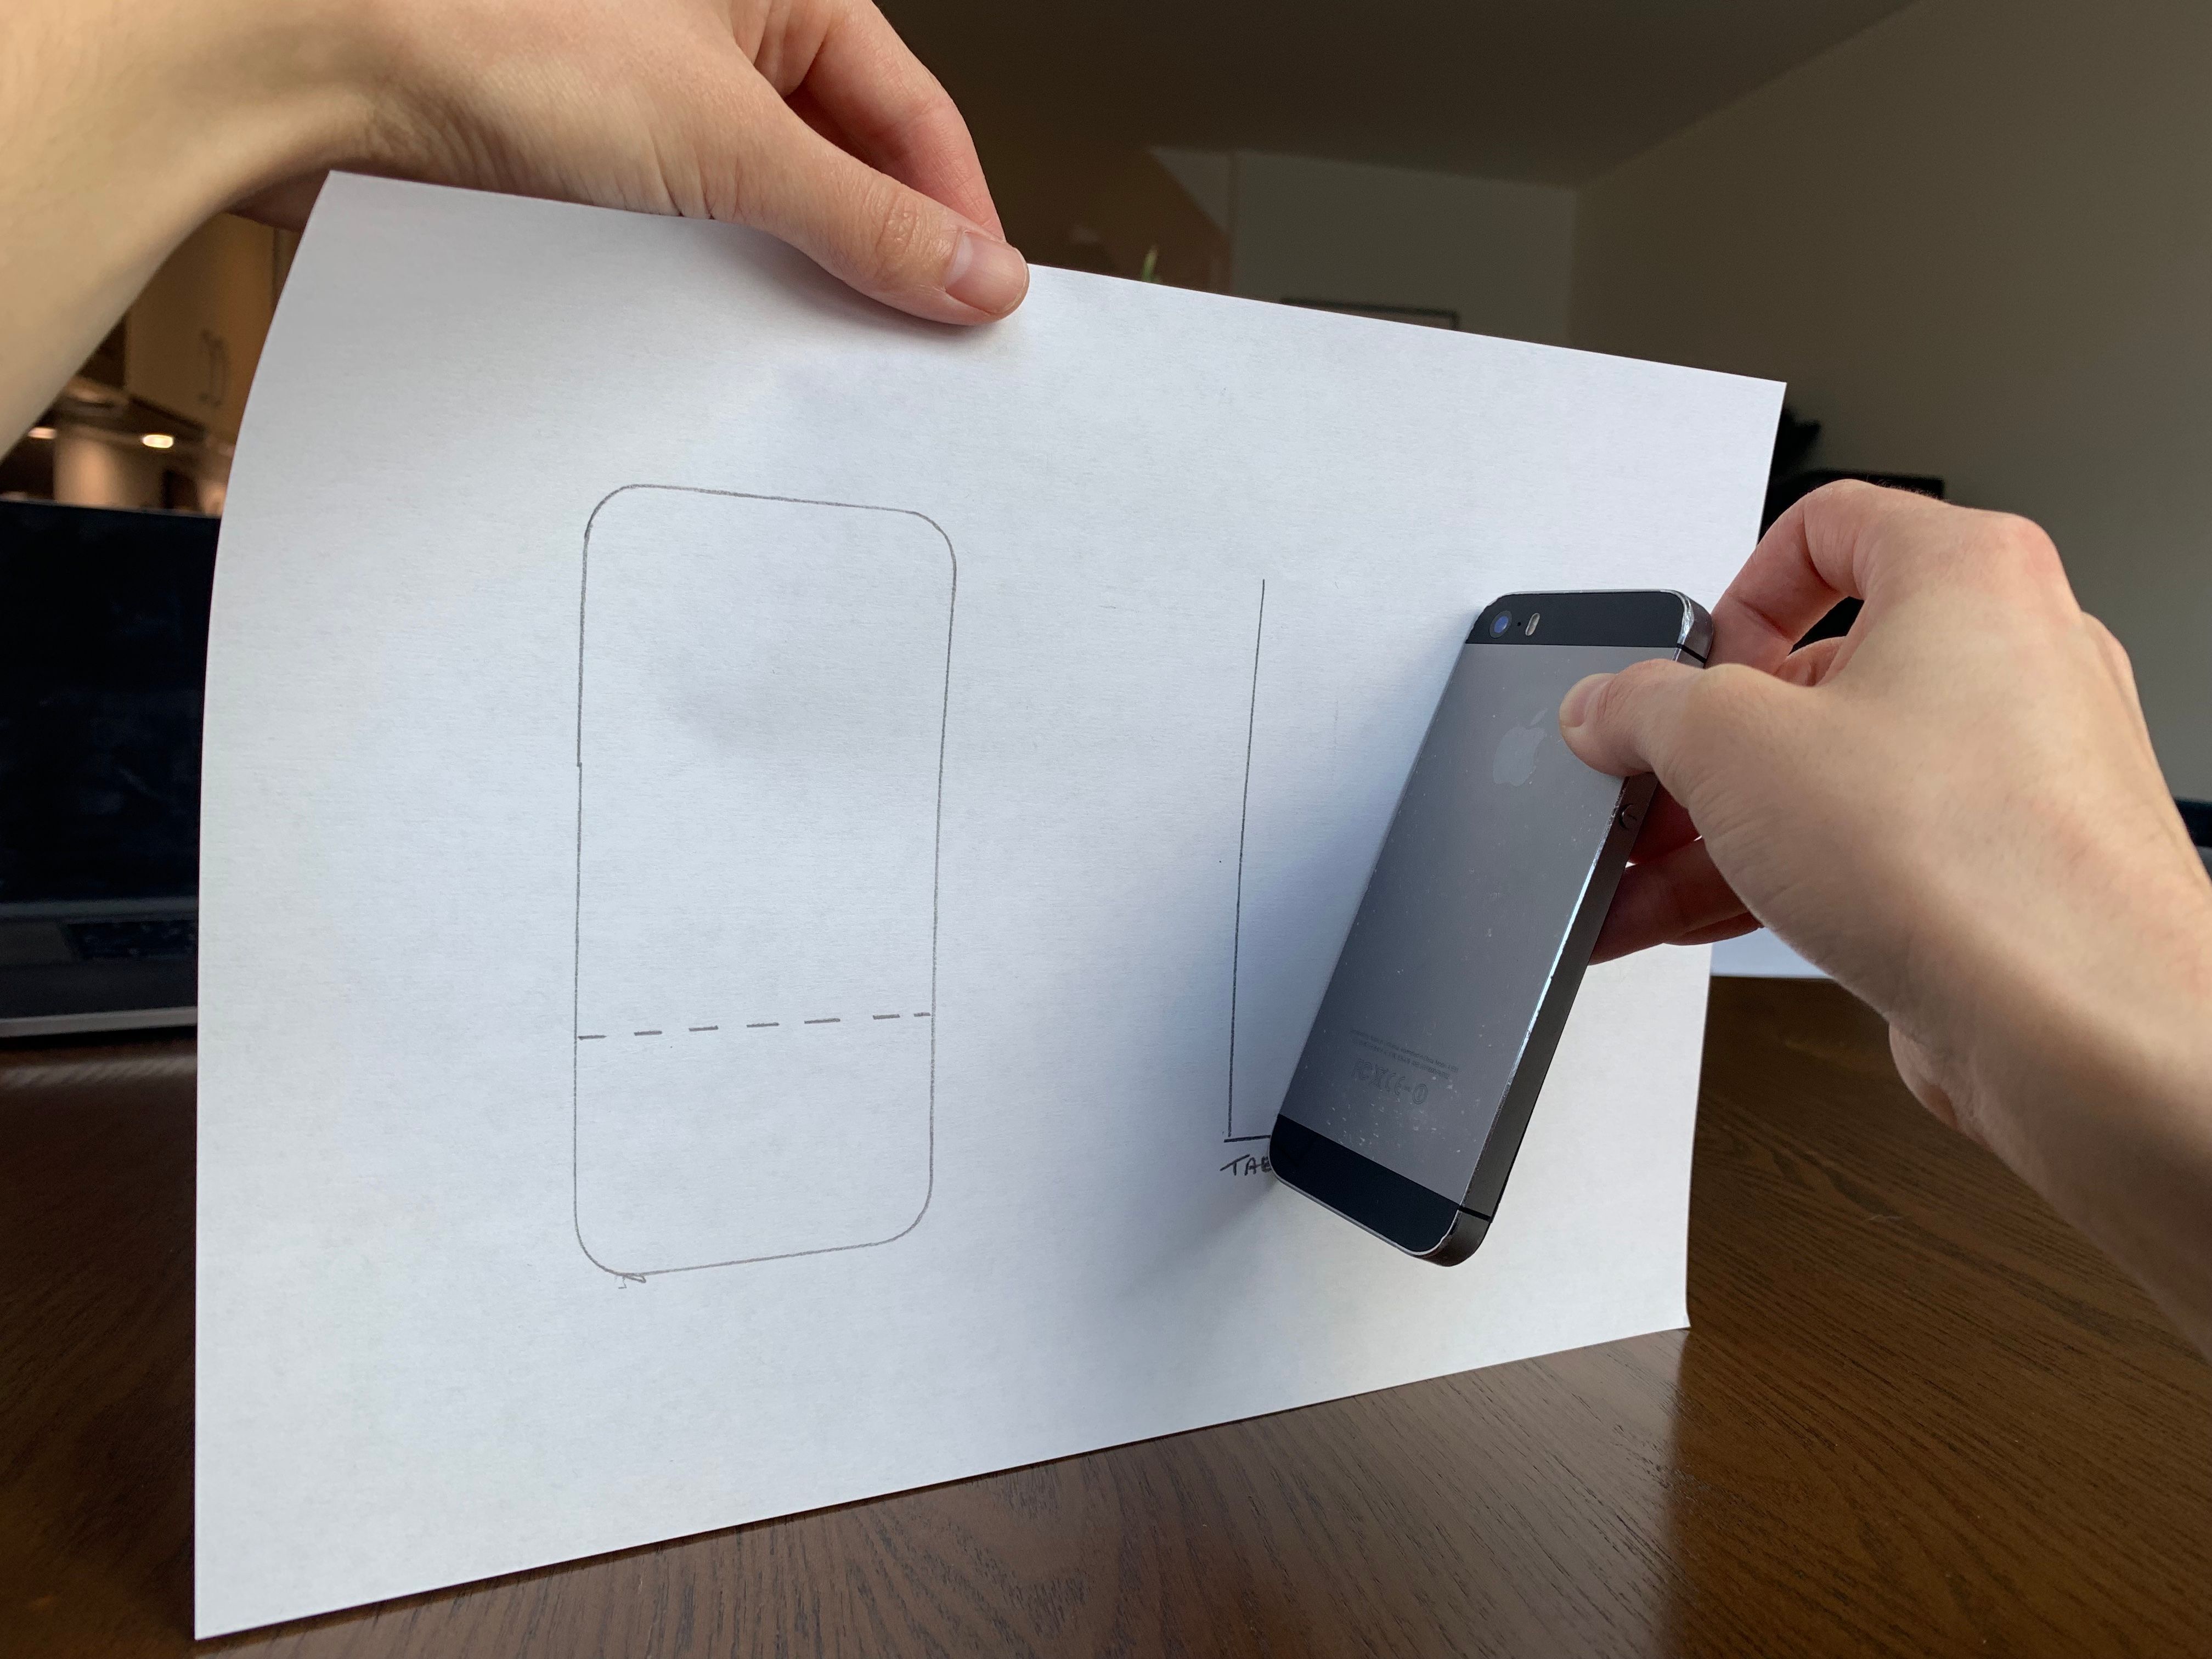 An iPhone held against a sheet of paper marking the angle